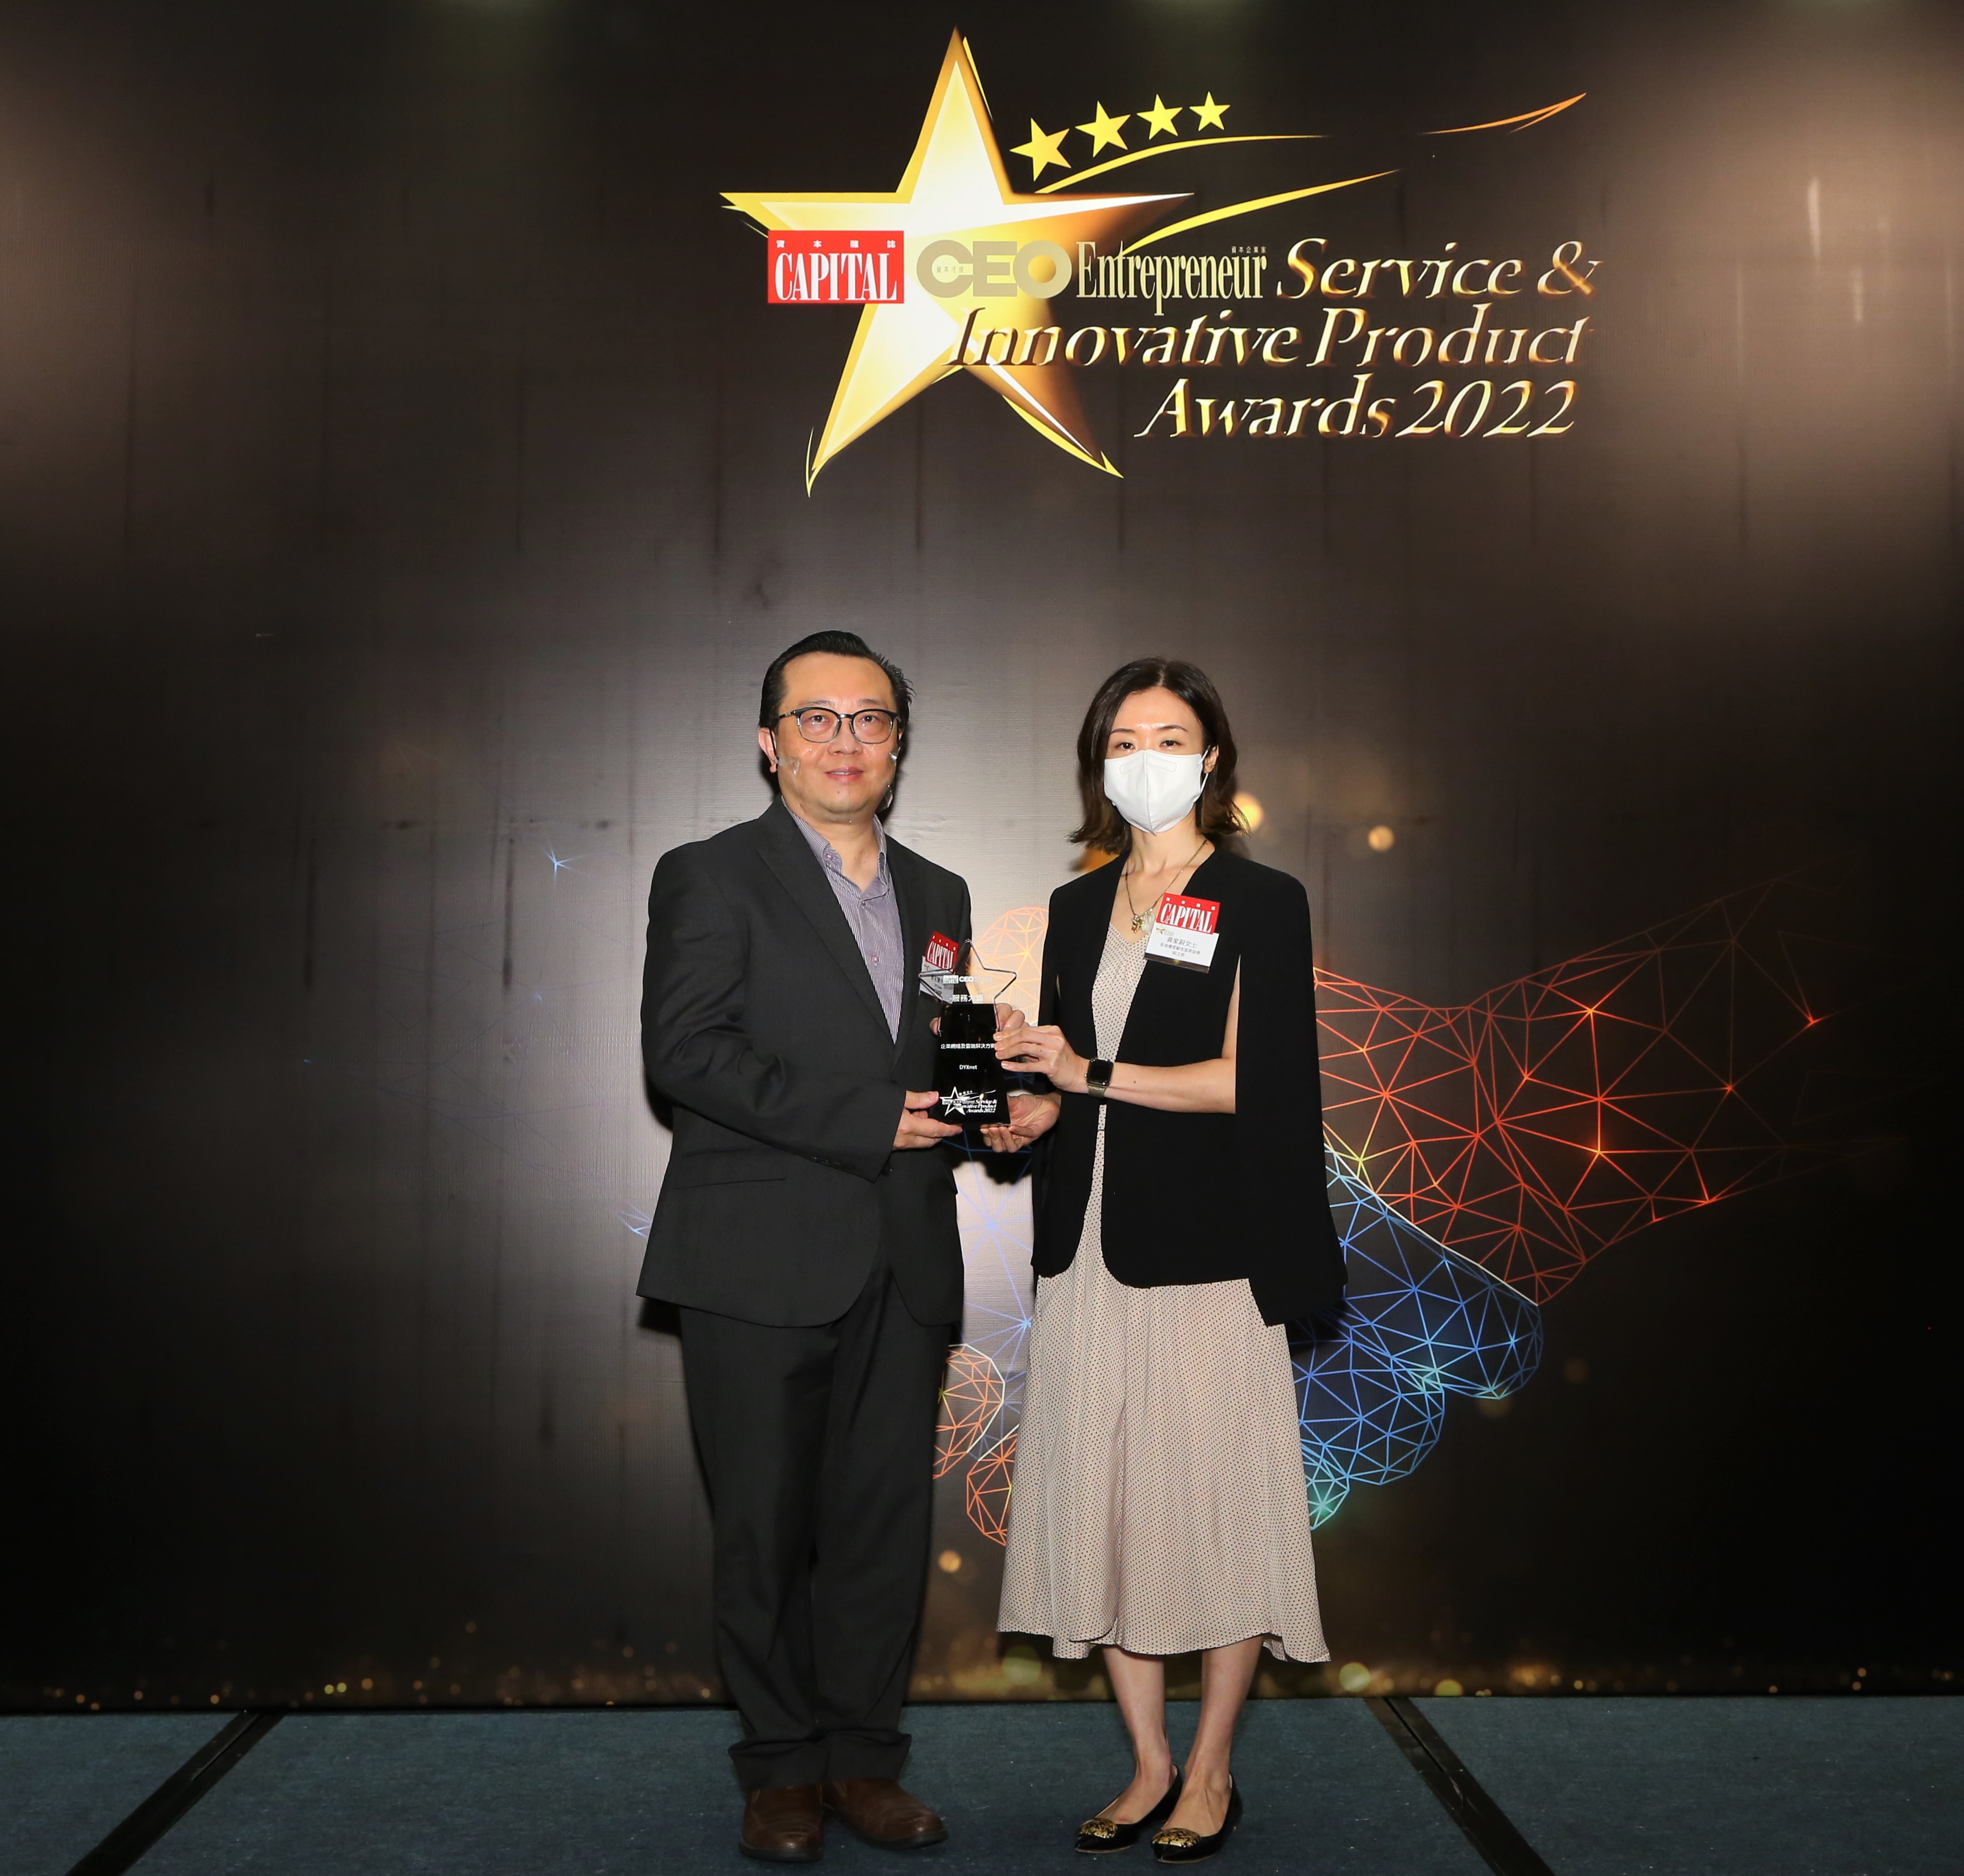 Ms. Ivy Wong, Vice Chairman of Hong Kong Association for Customer Service Excellence, presents the award to Mr. Tony Tsang, CEO of DYXnet